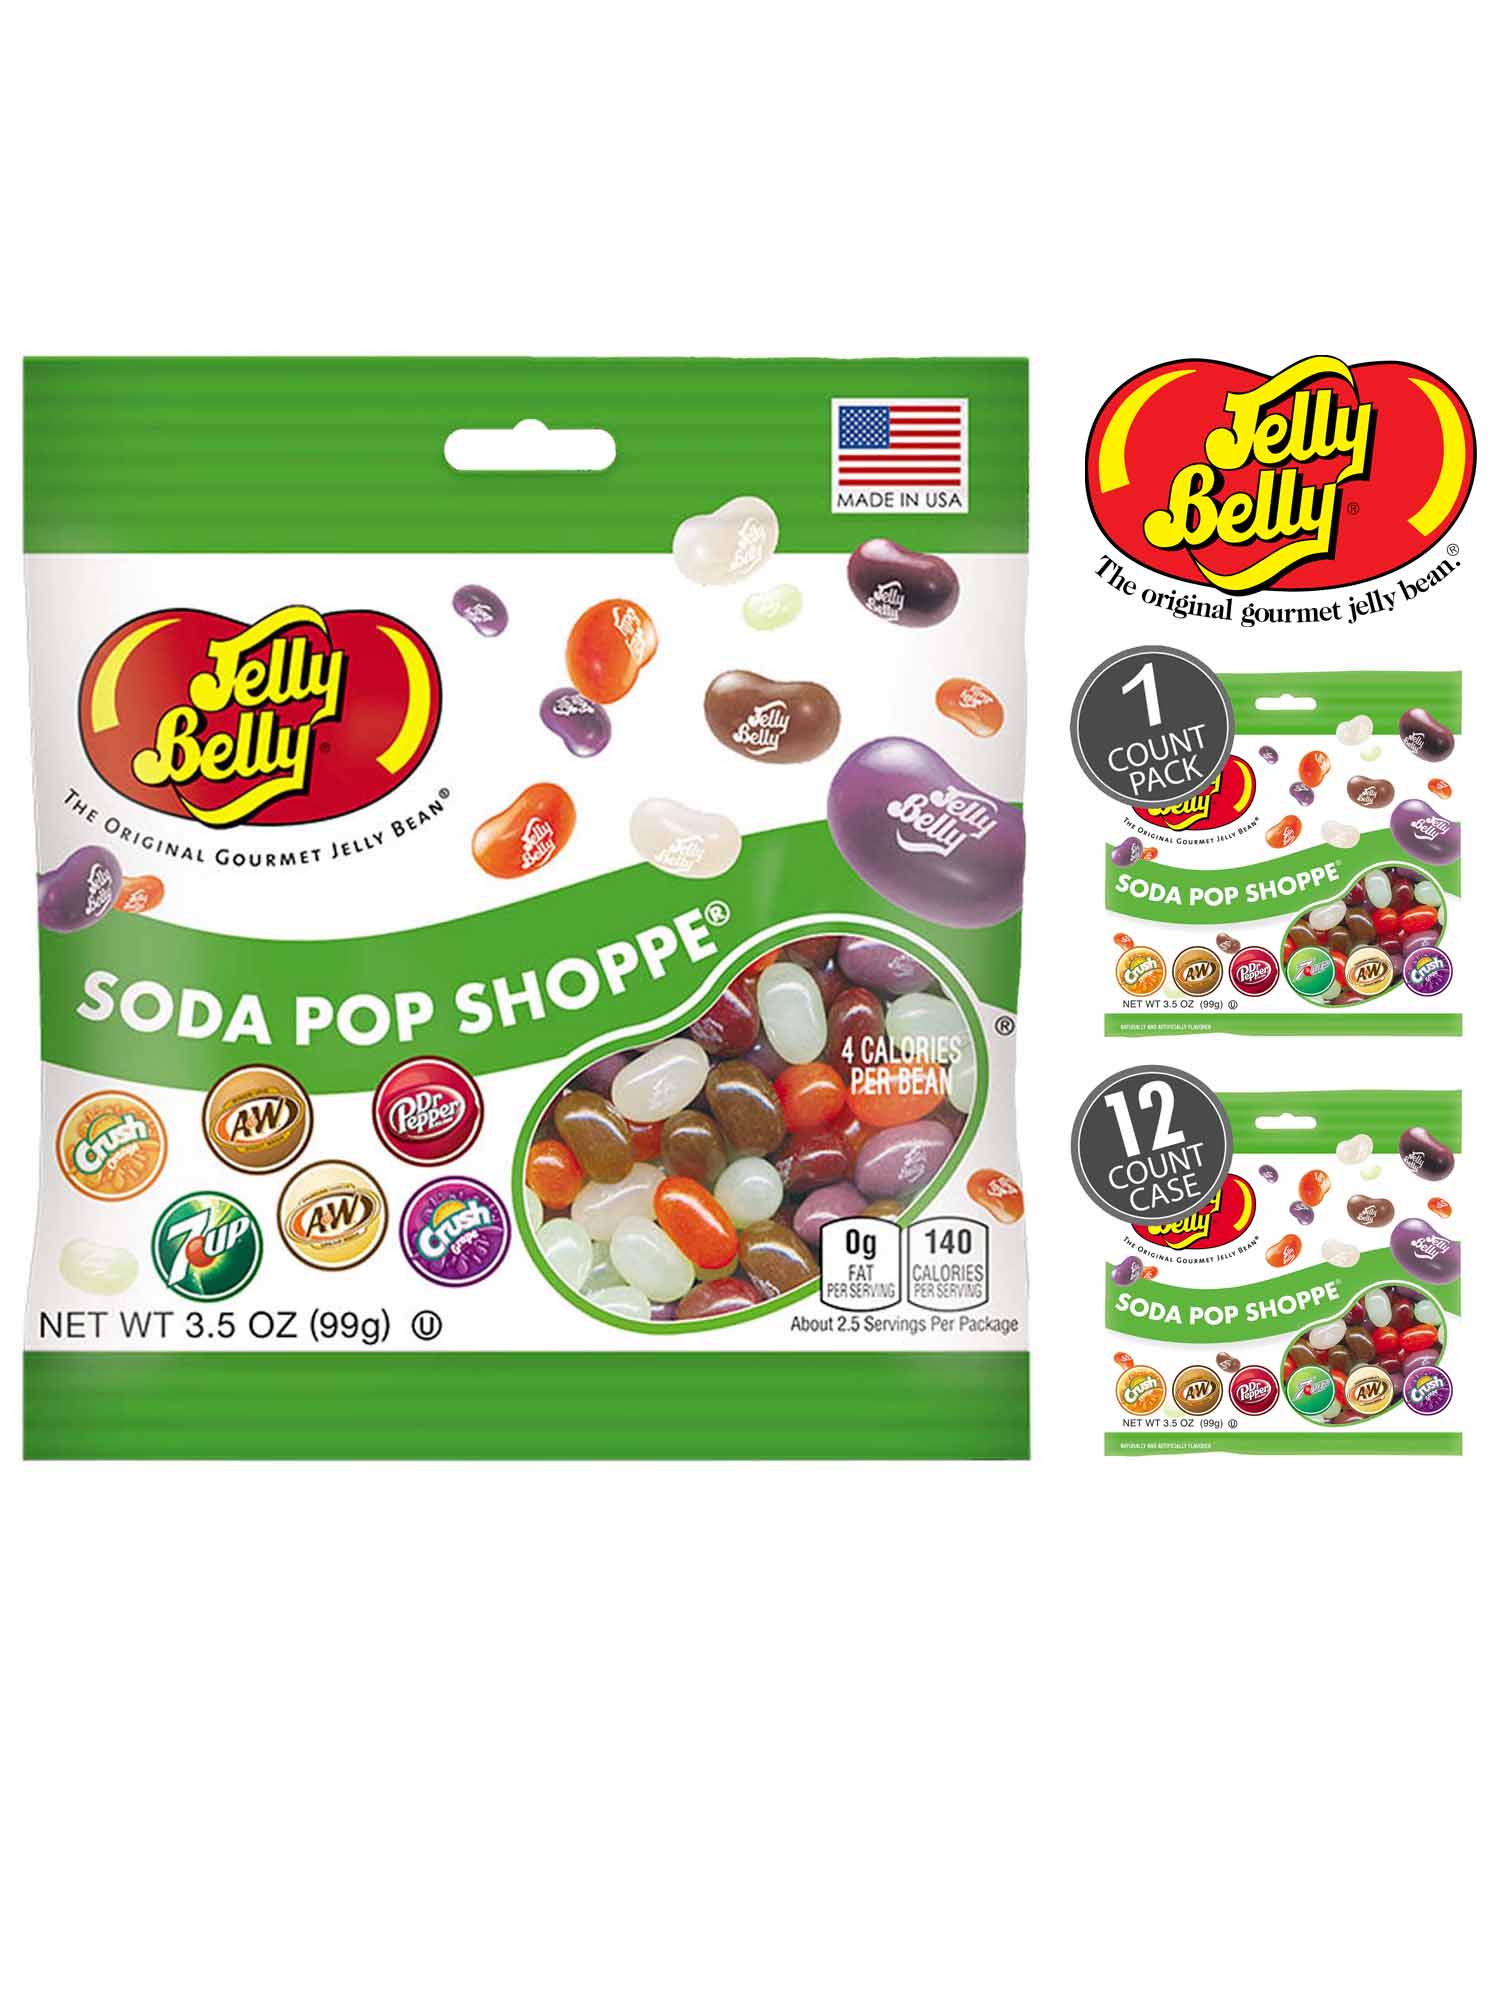 Jelly Belly 20 Flavor Assorted Jelly Beans 1 oz Bag - 30-Count Case